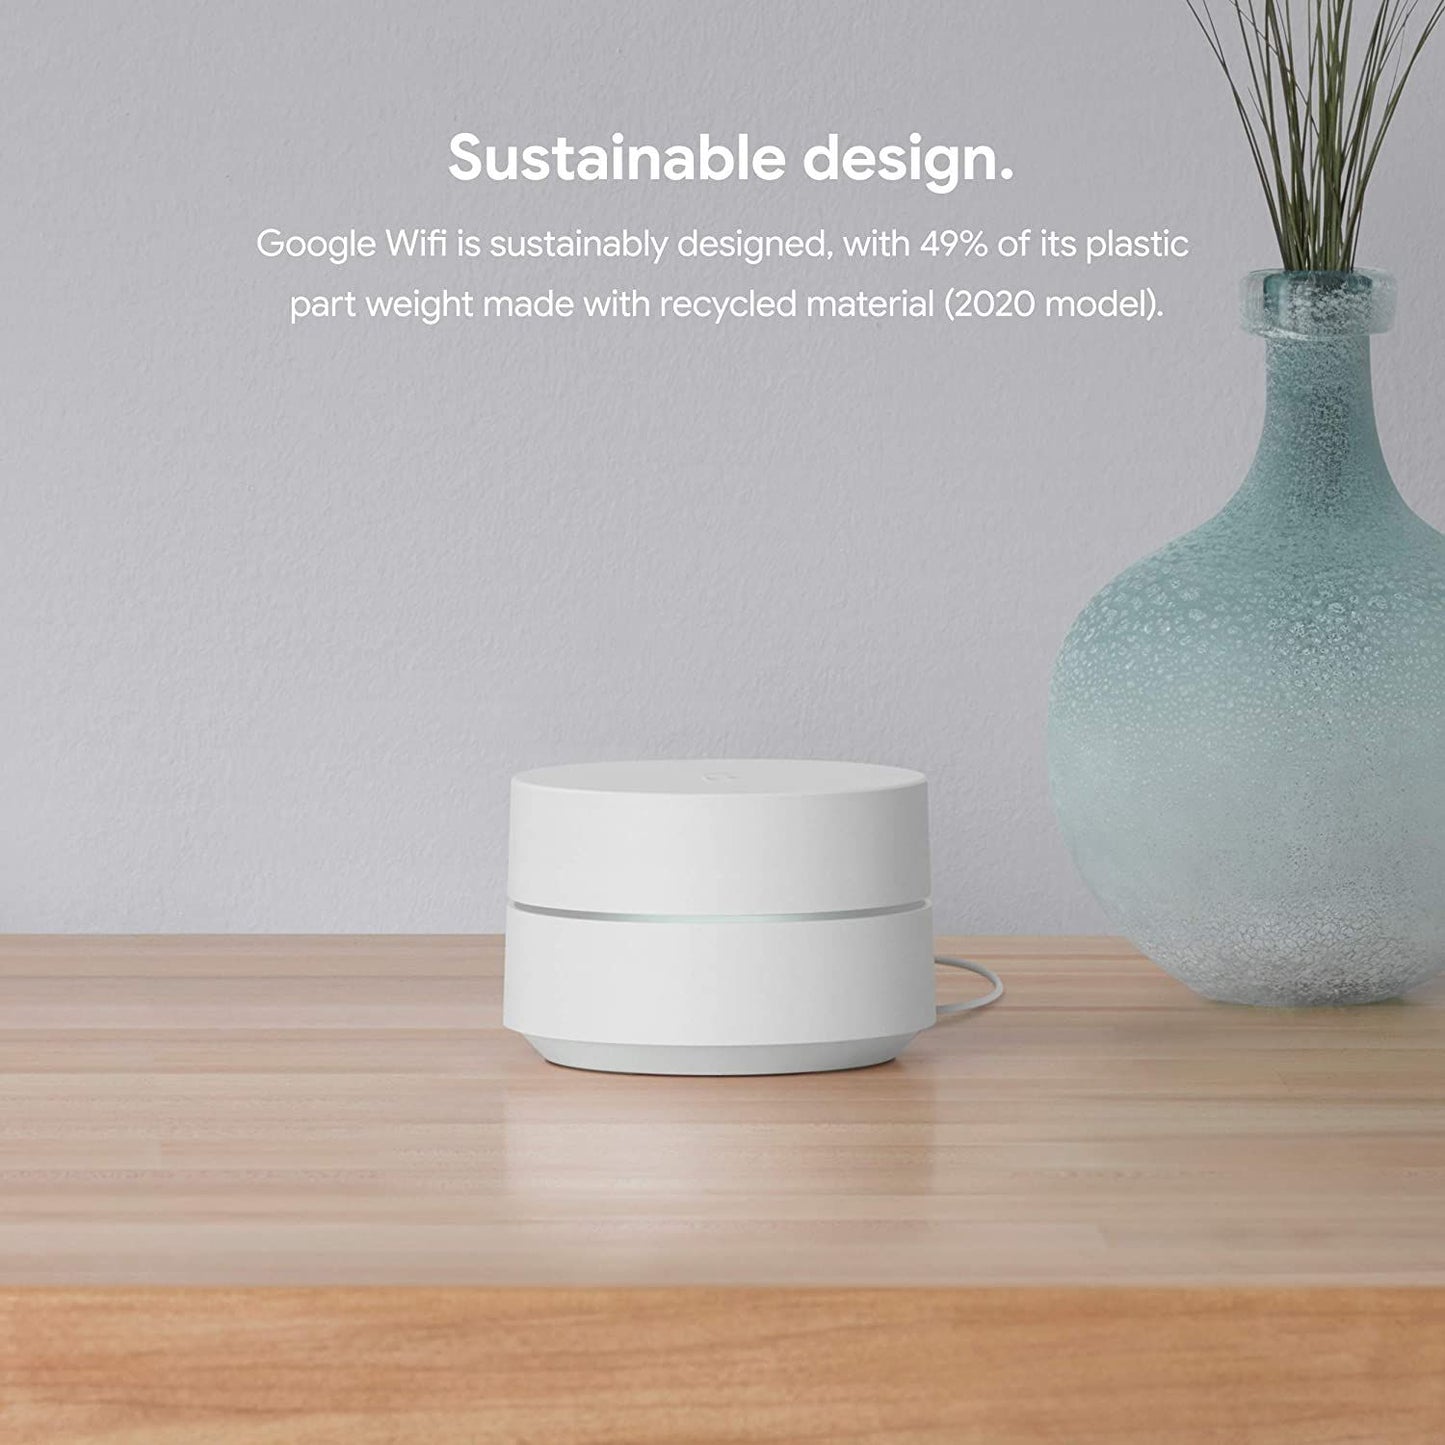 Google Wifi GA02430-US Mesh Network System Router AC1200 Point